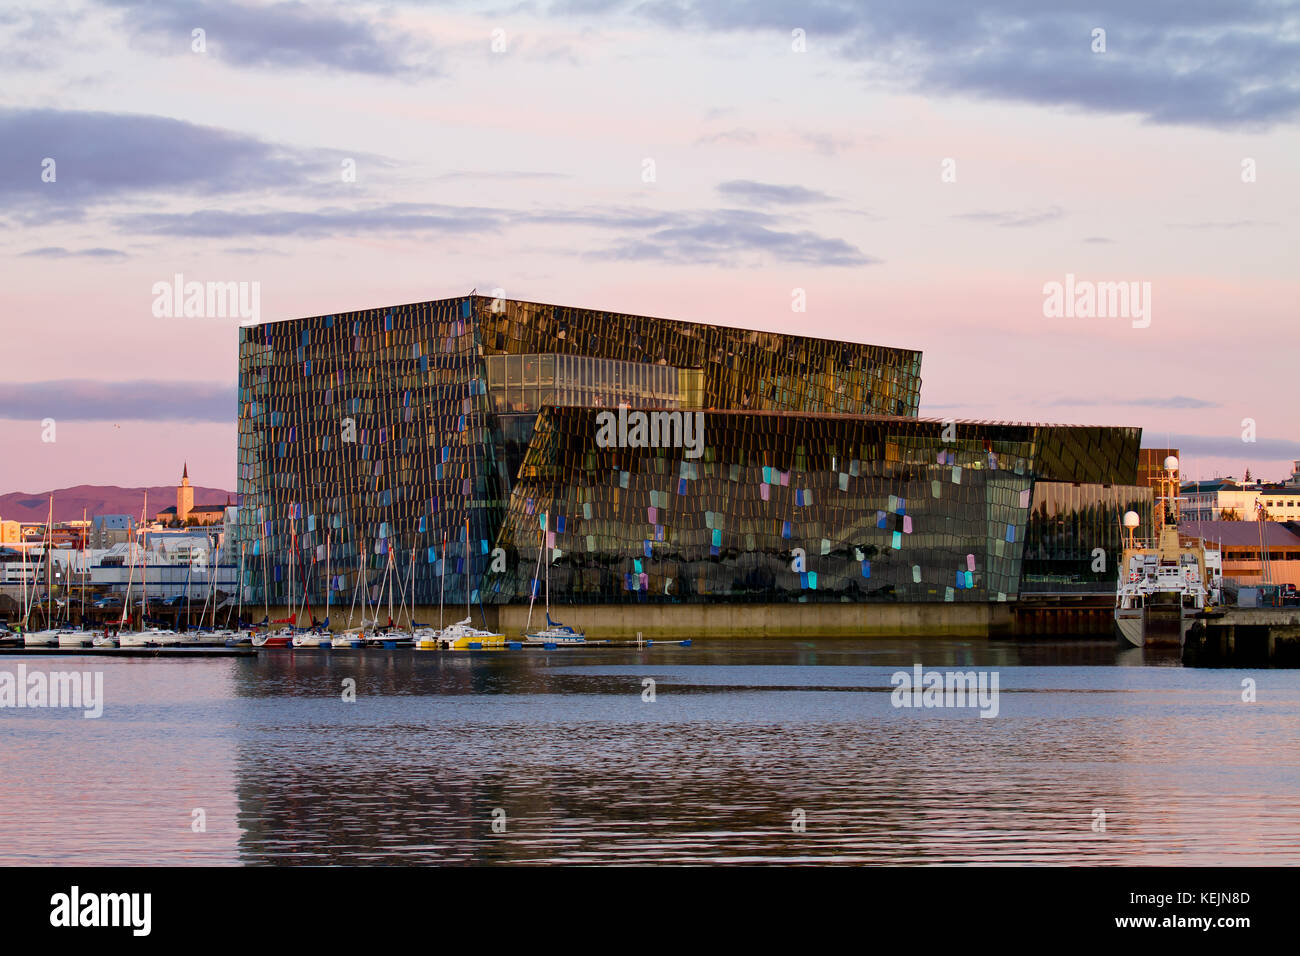 Harpa concert hall and conference center in Reykjavík, Iceland. Stock Photo